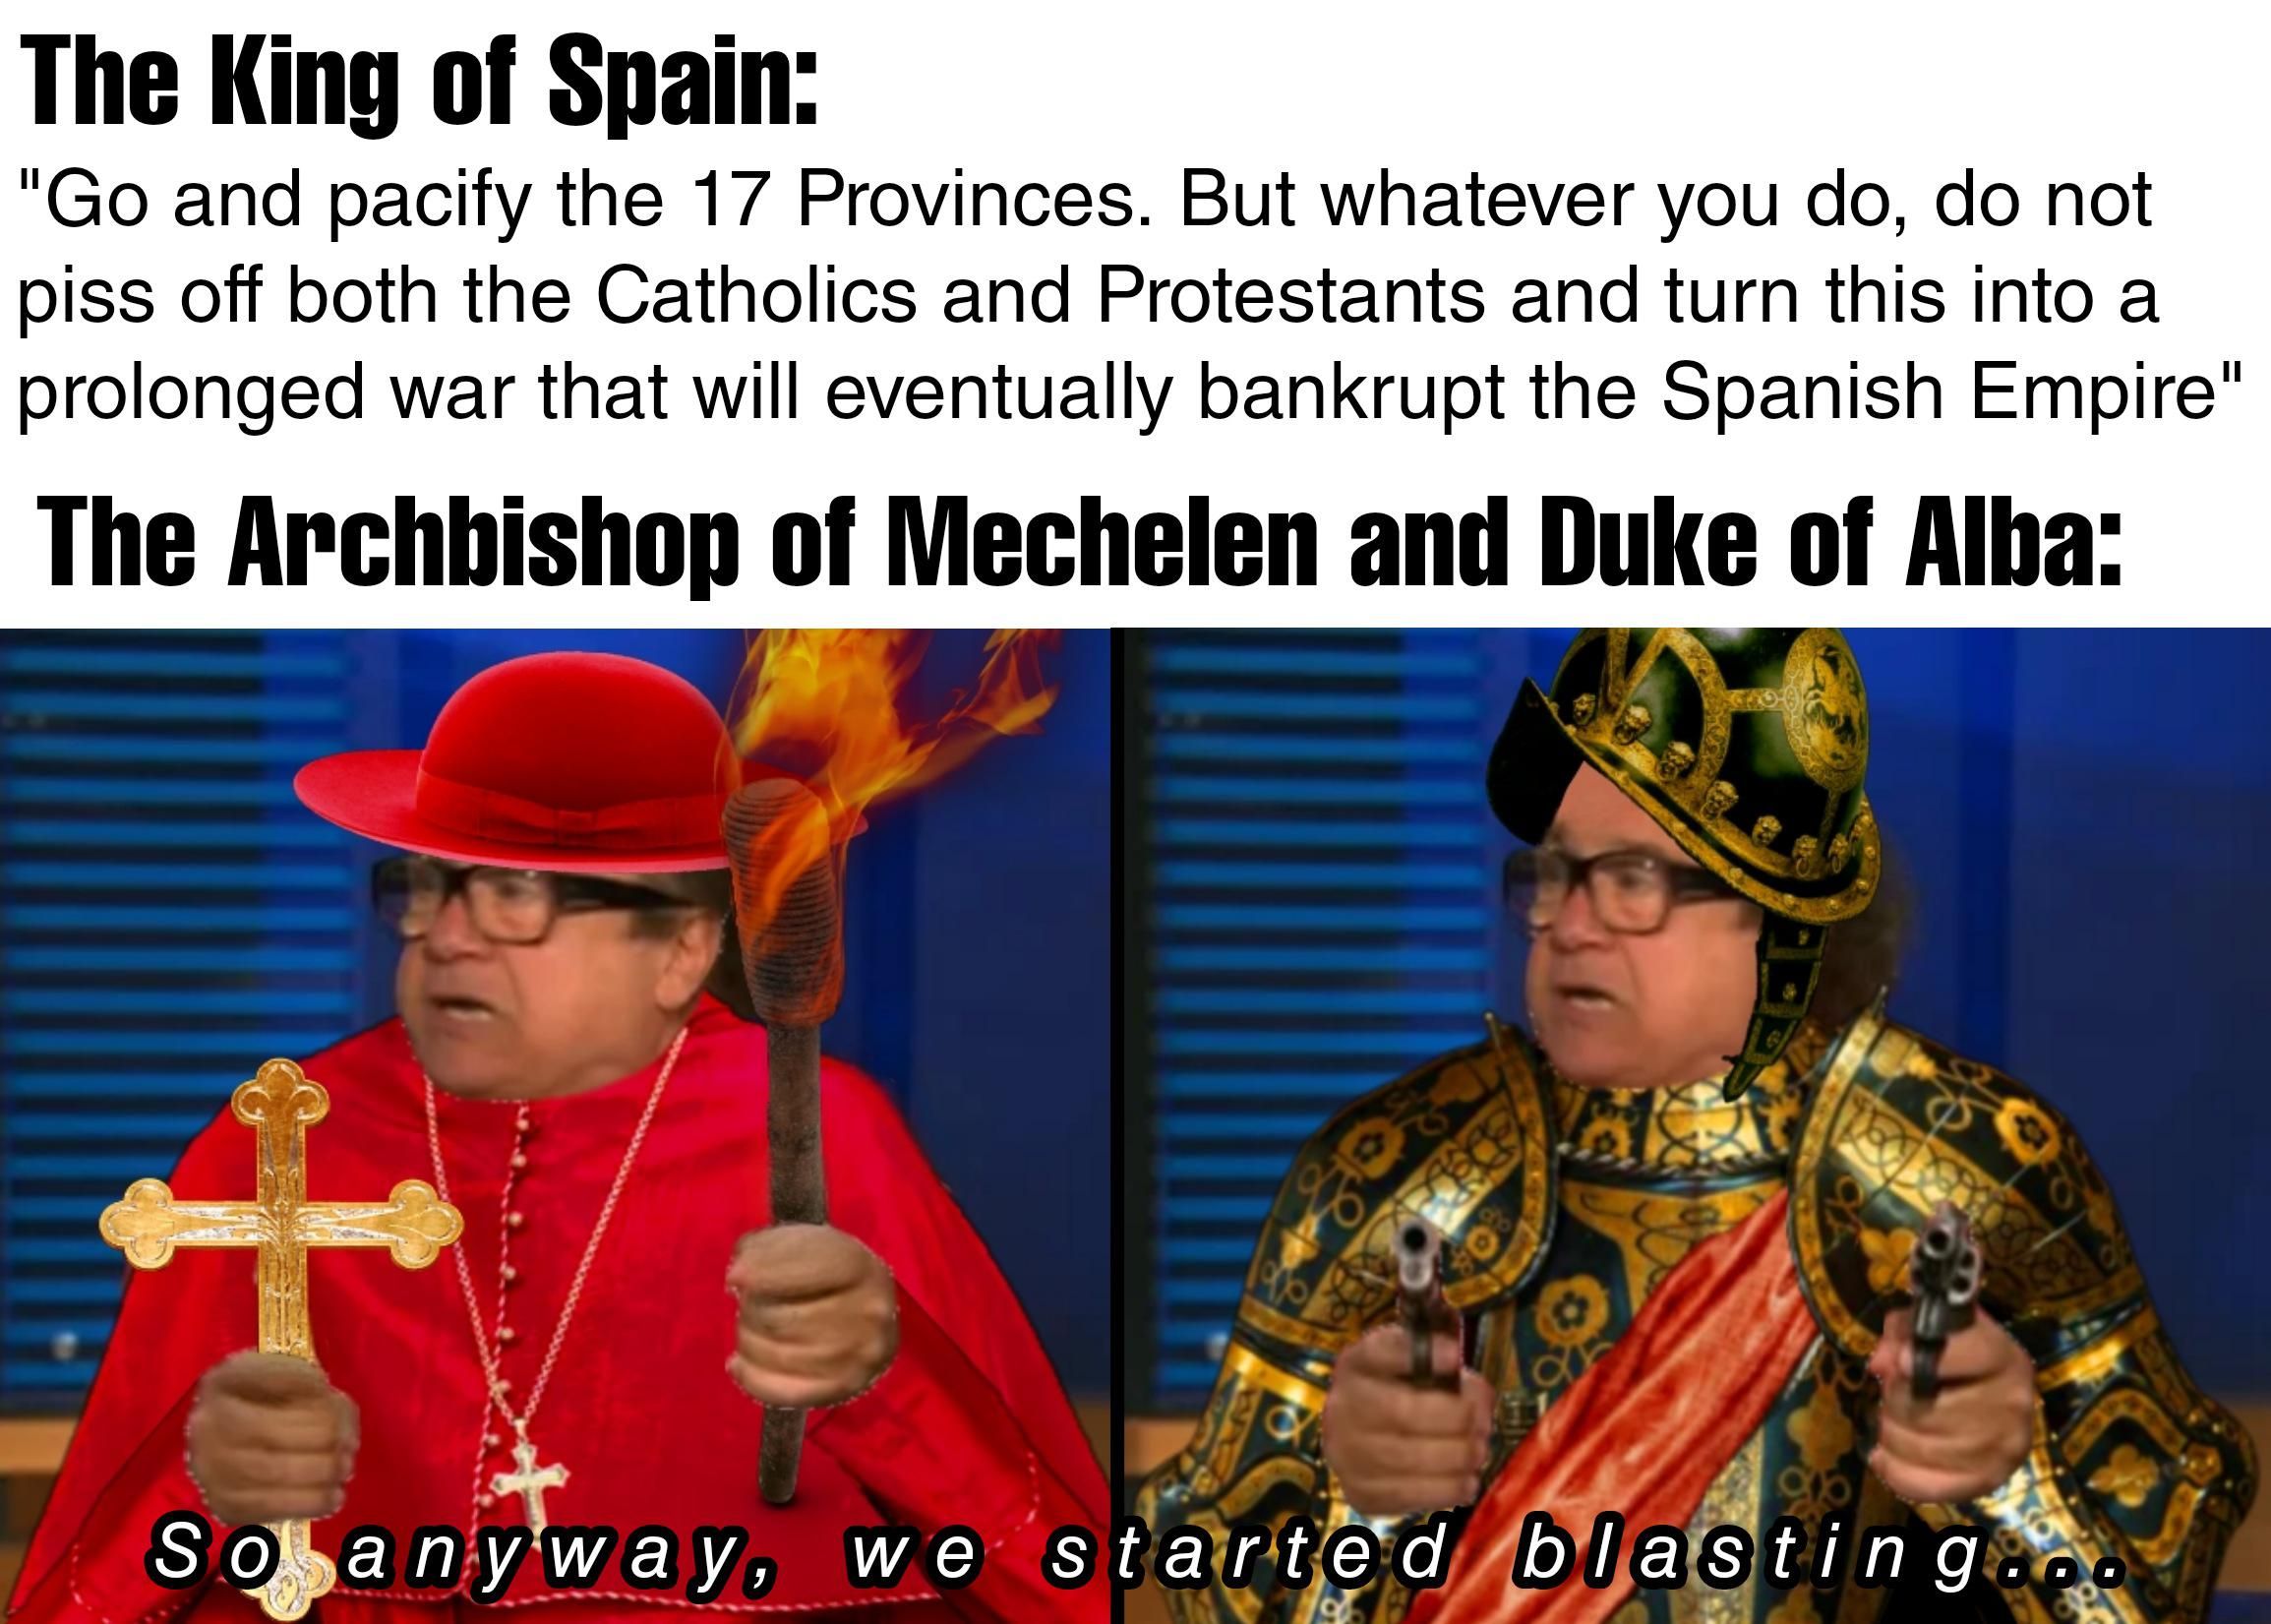 The spanish solution be like: